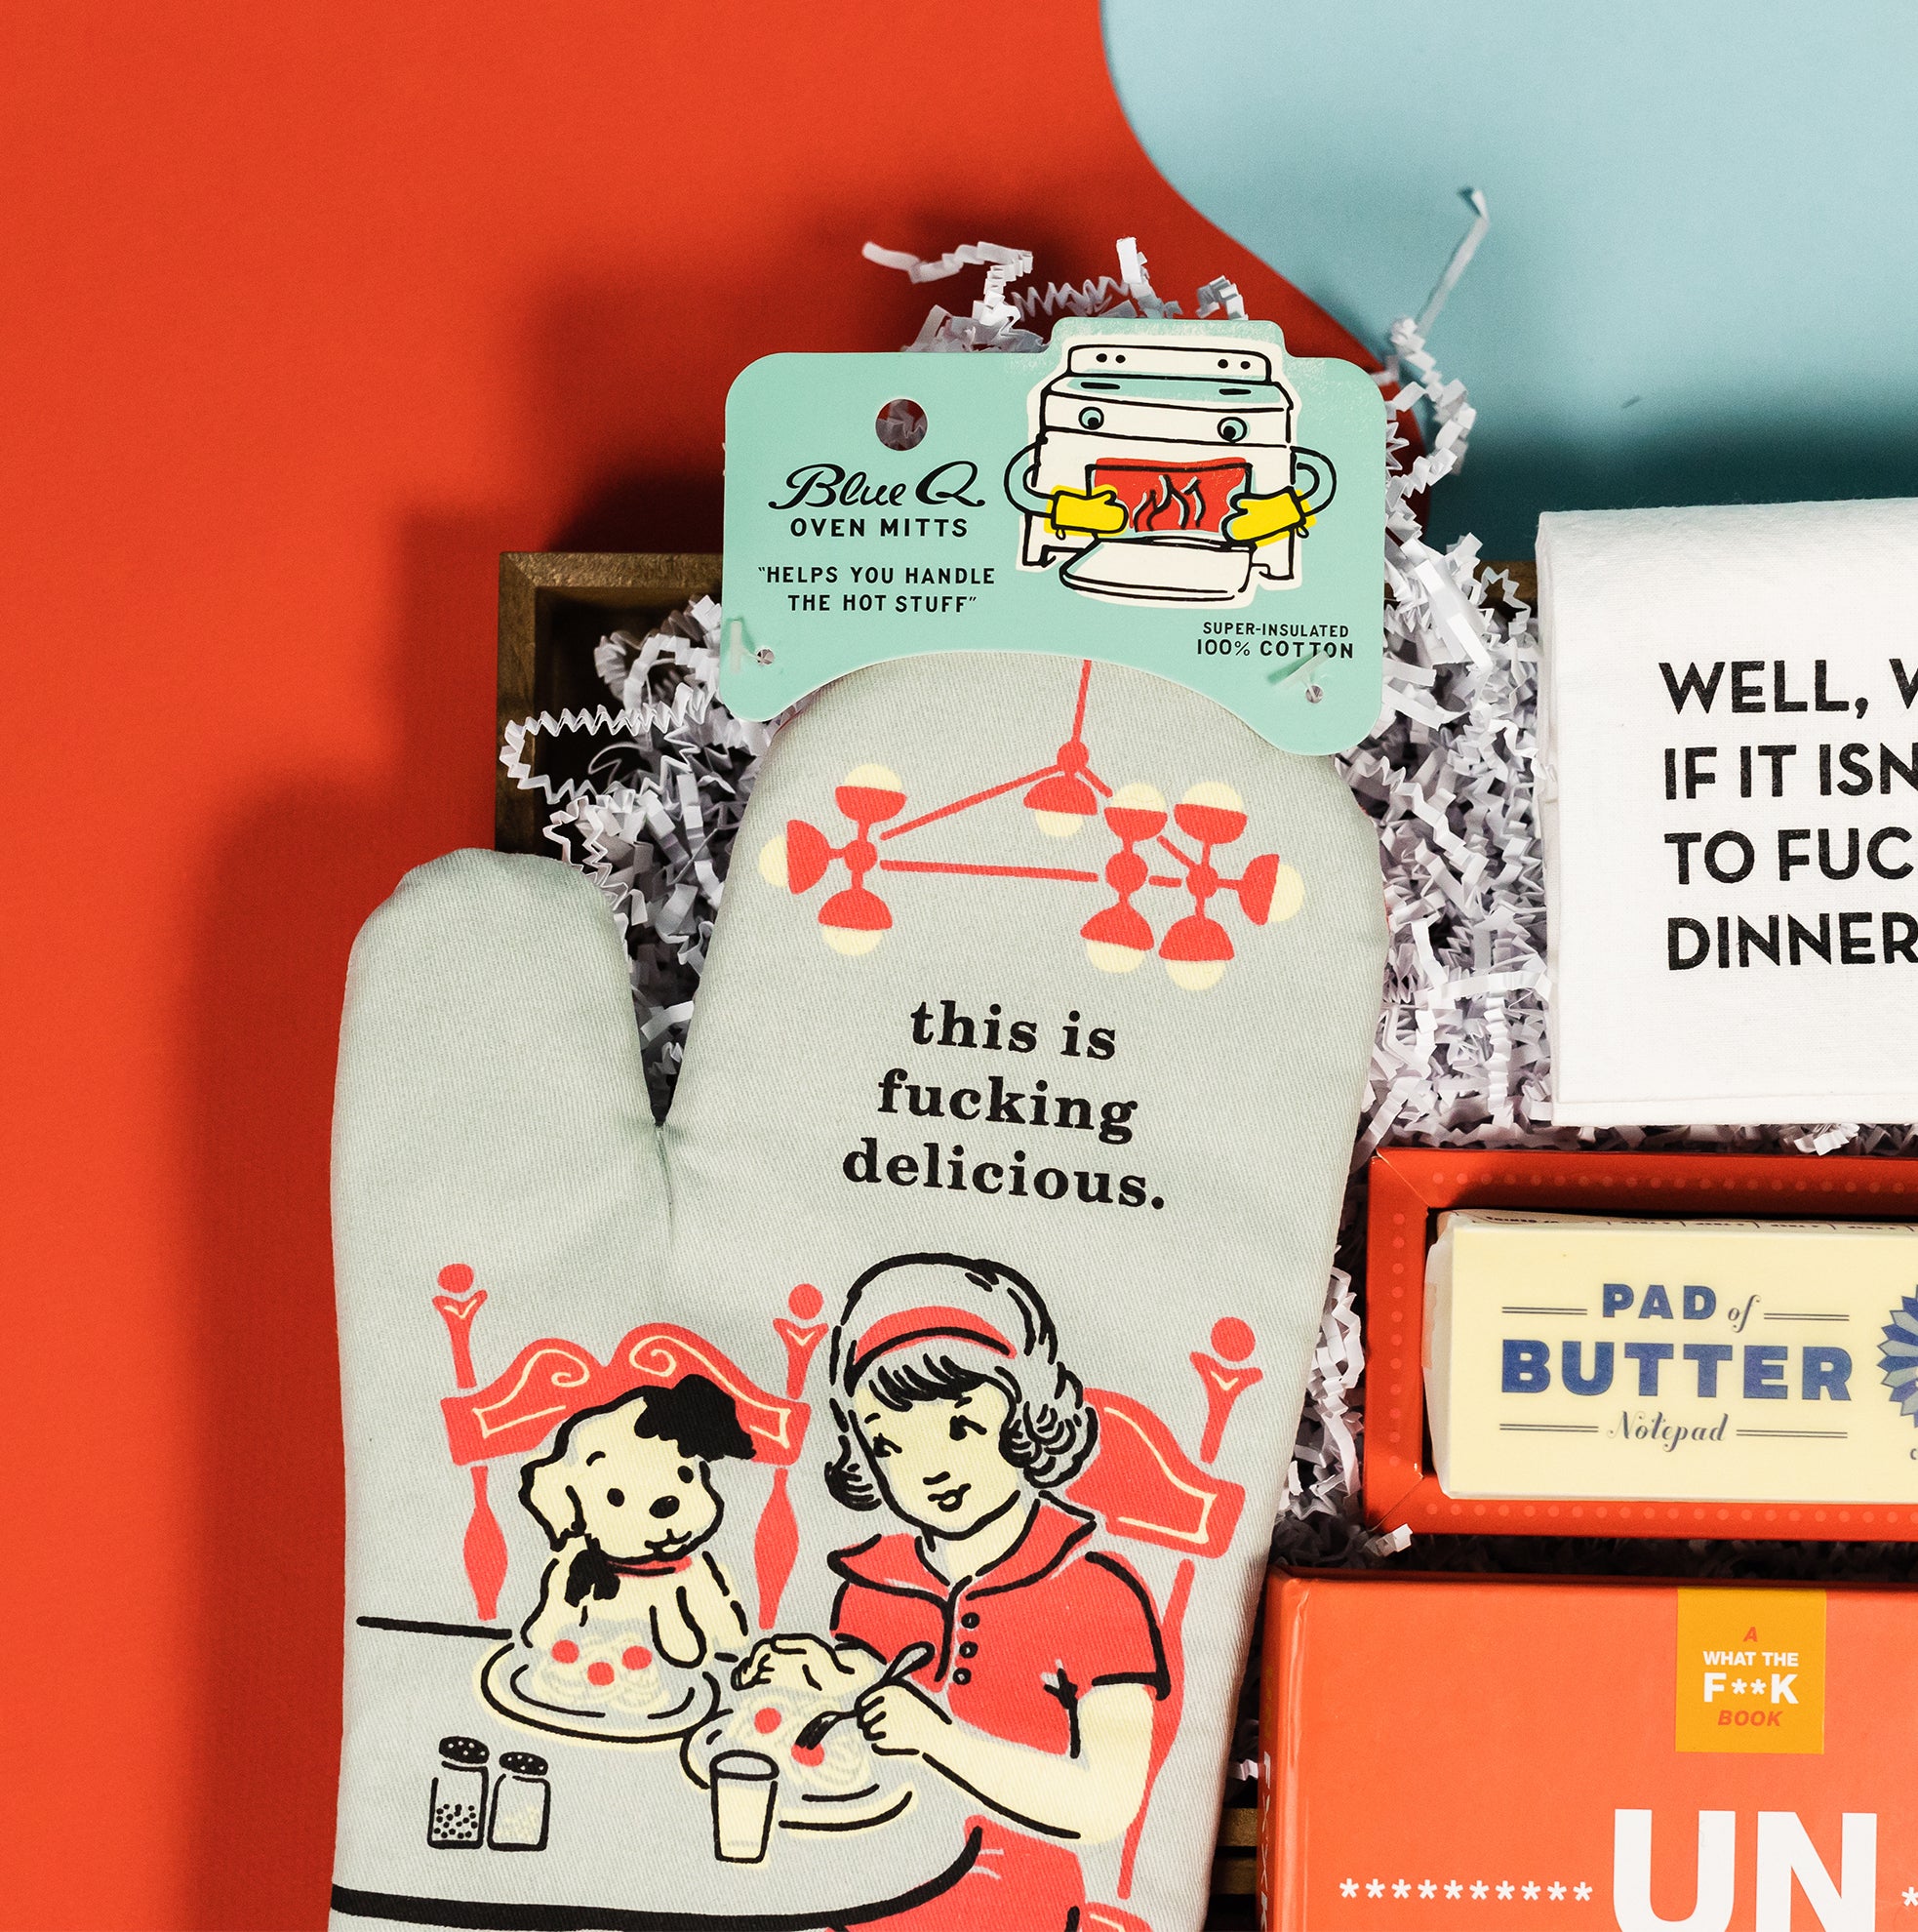 On a calming blue background with bold red wobbly cutout sits a wooden tray of snarky kitchen themed gifts among white paper krinkle. This photo is a close-up on the retro illustrated oven mitt that says "I'll Feed All You Fuckers," featuring a 50s style girl at the table eating with her little spotted puppy.